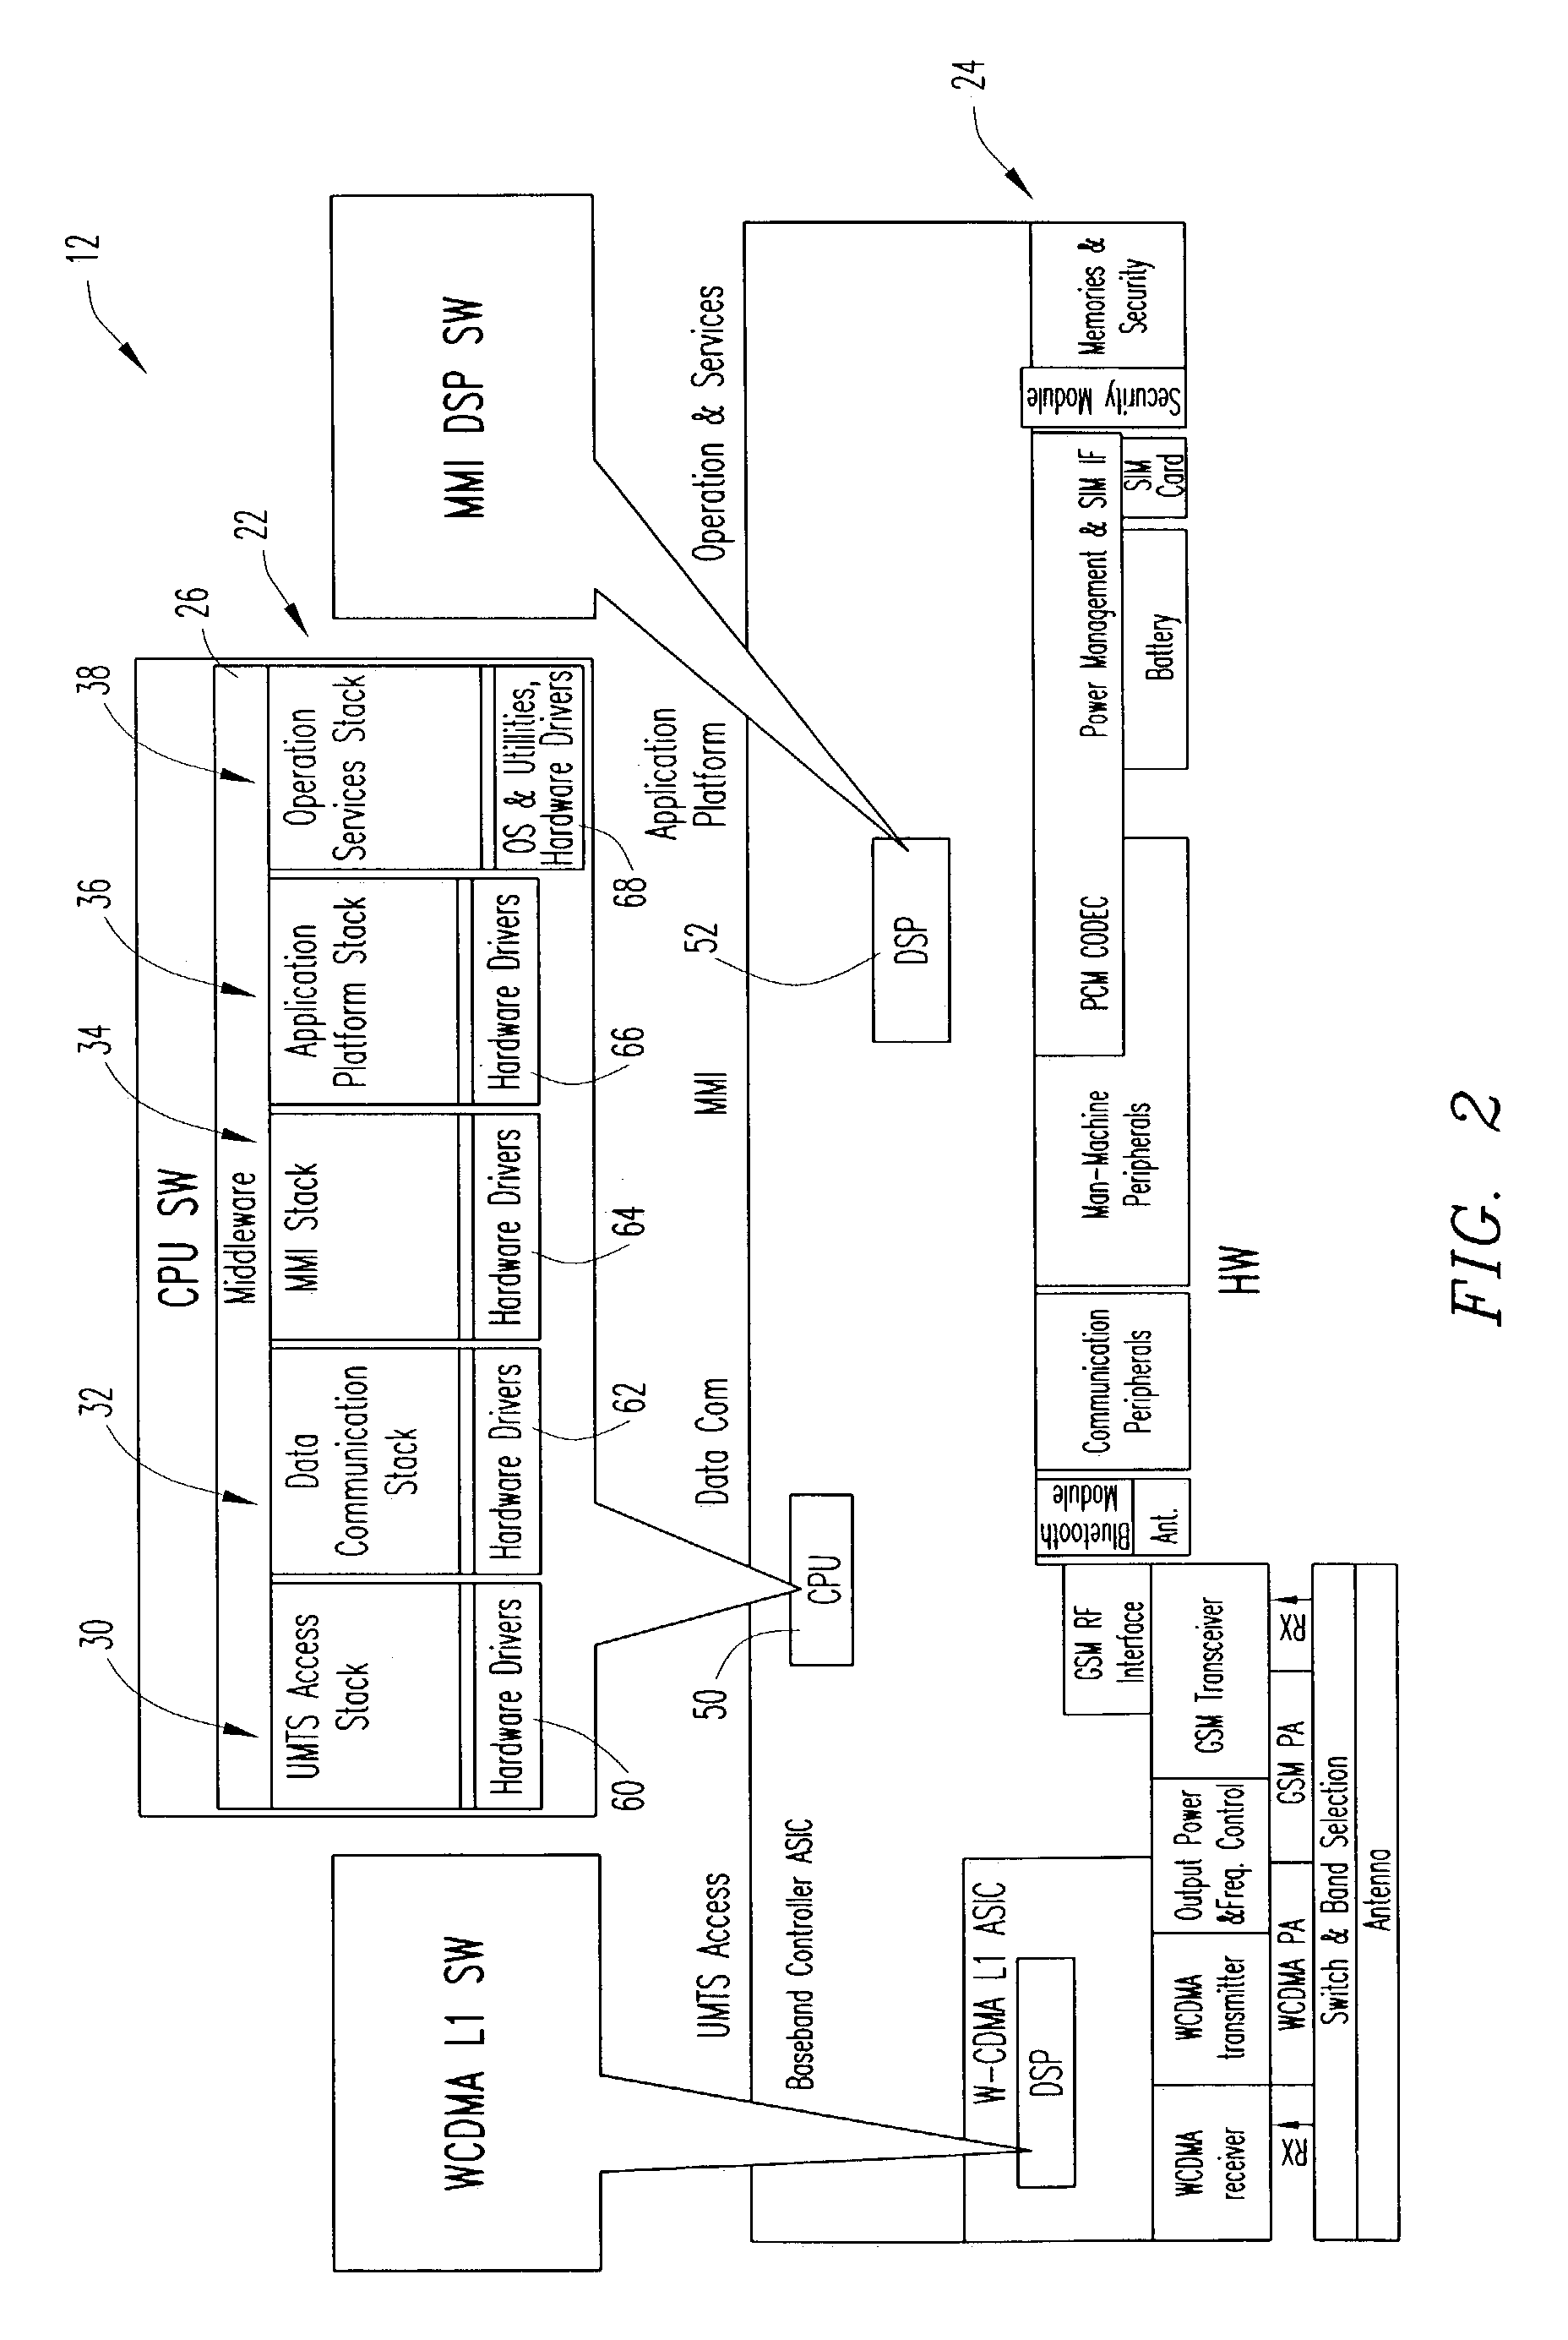 Middleware services layer for platform system for mobile terminals